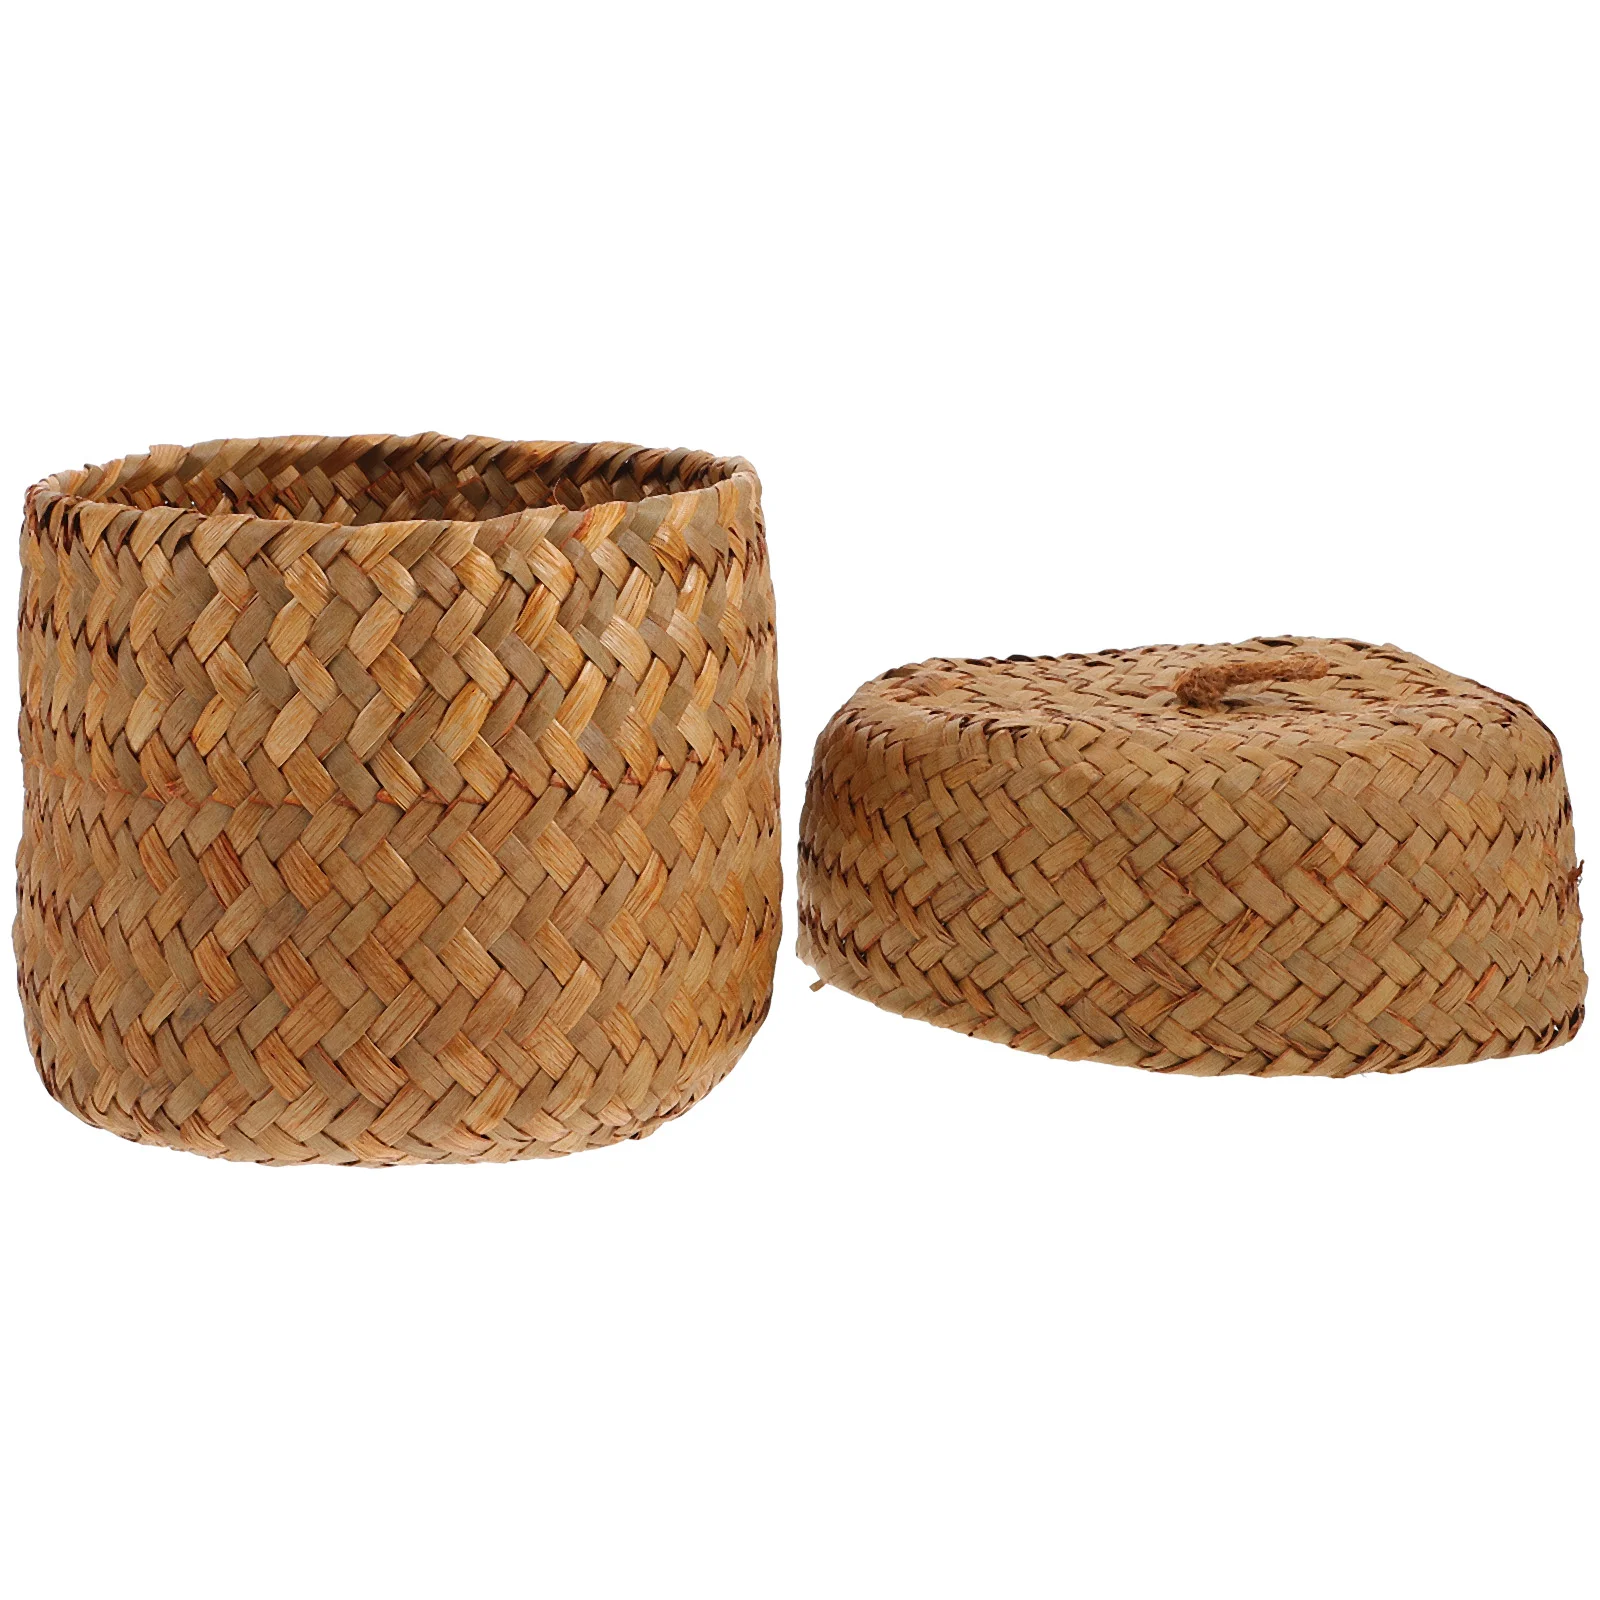 

Mini Wicker Basket Lid Woven Round Hand Baskets Gifts Empty Candy Containers Seagrass Laundry